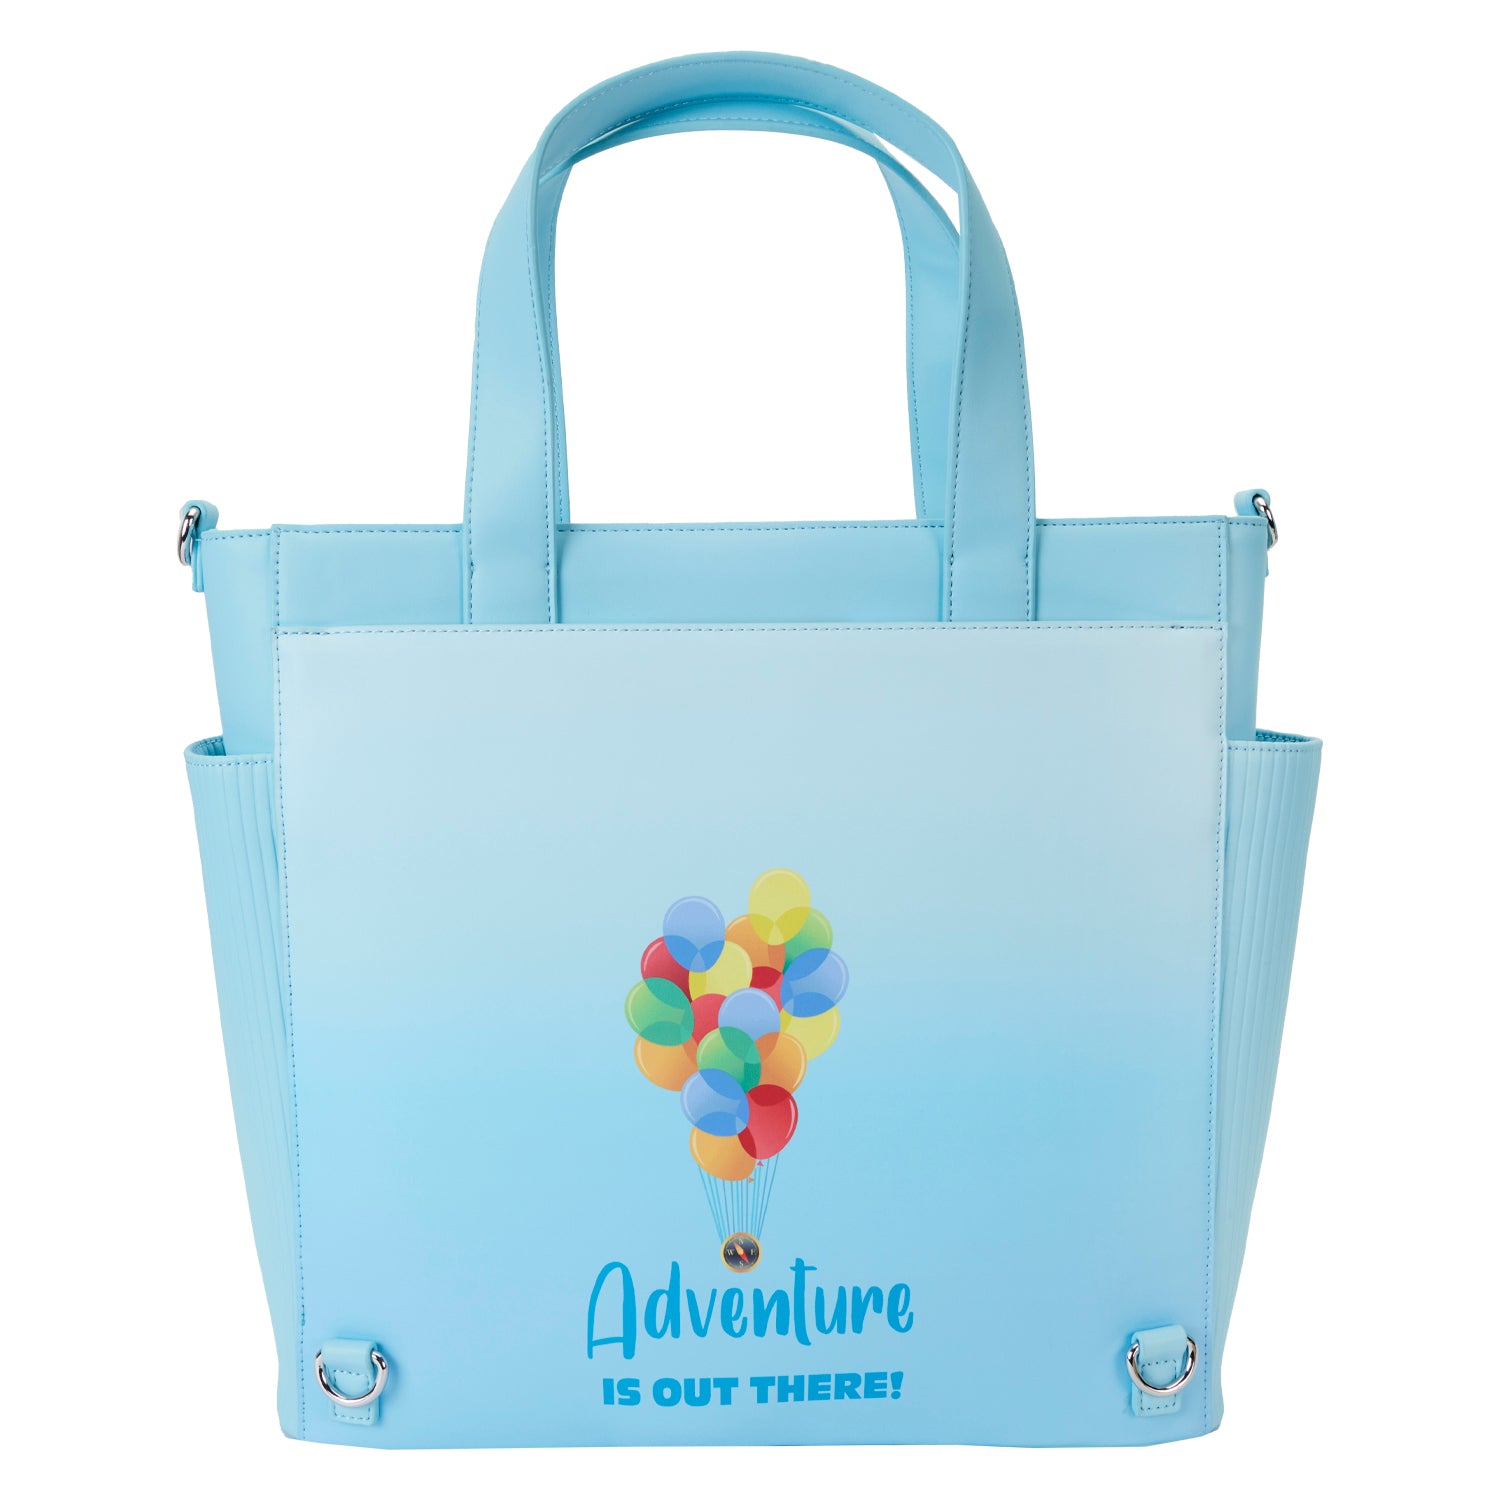 Loungefly x Pixar Up 15th Anniversary Convertible Tote Bag